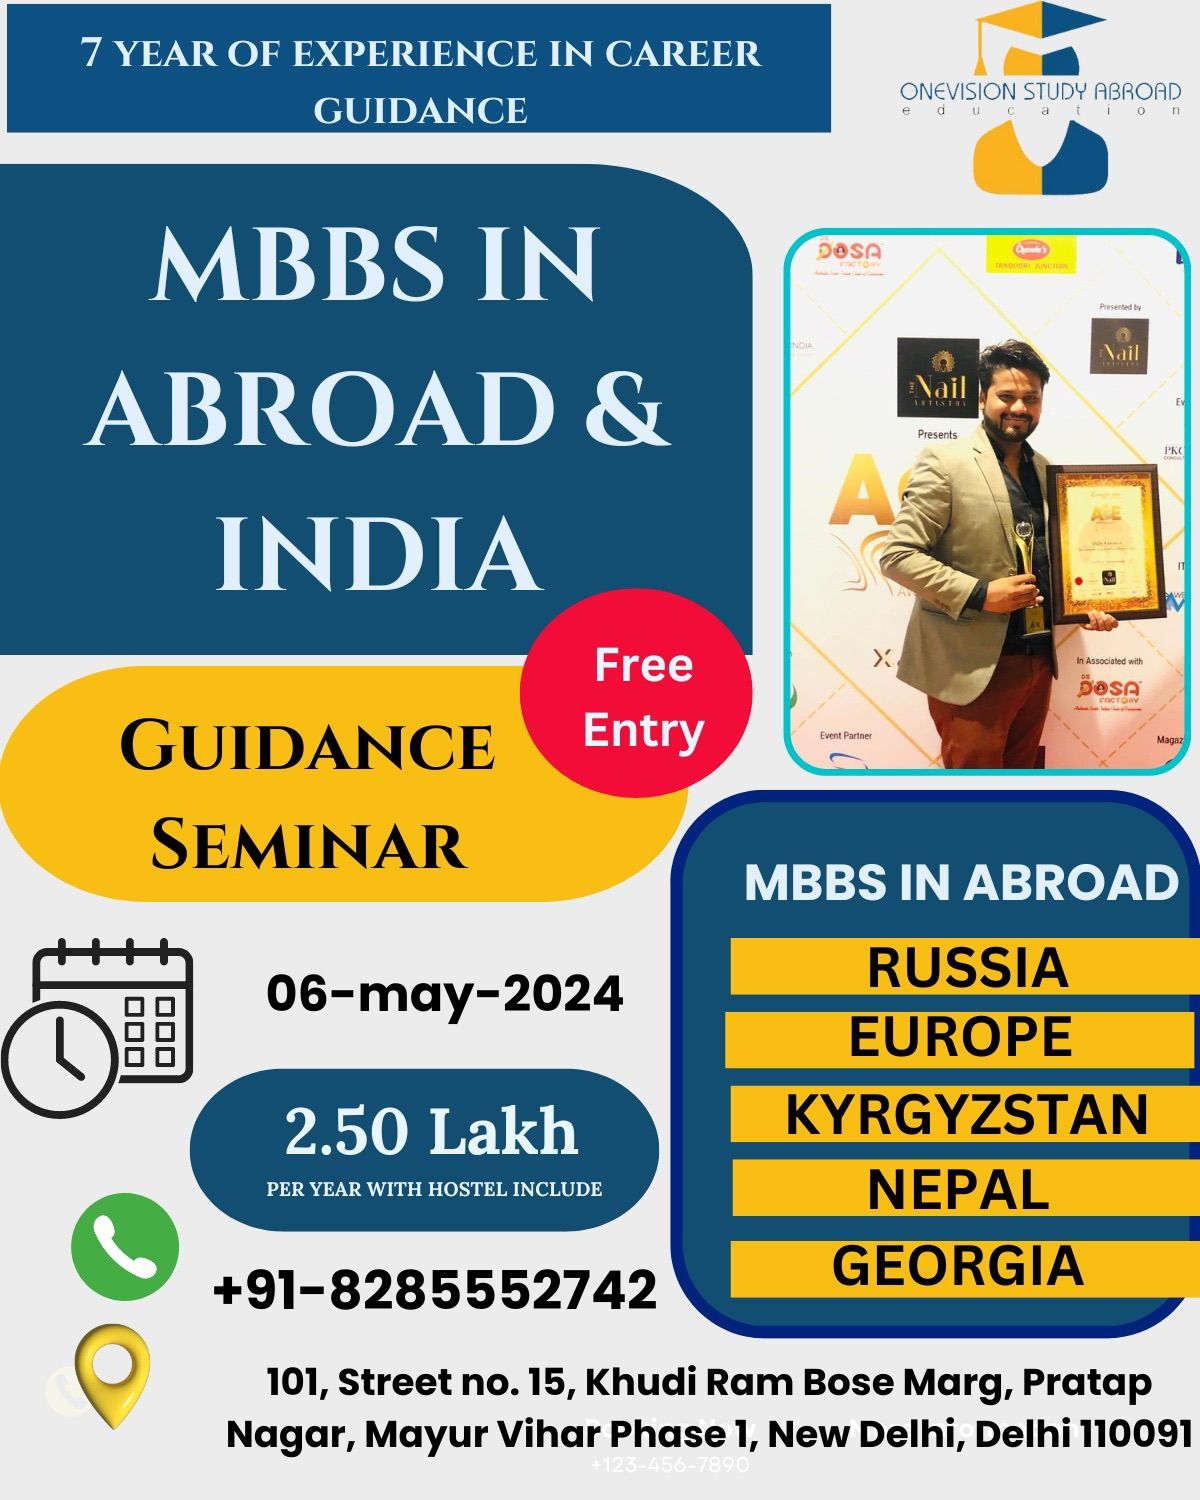 MBBS In Abroad&India Guidance Seminar